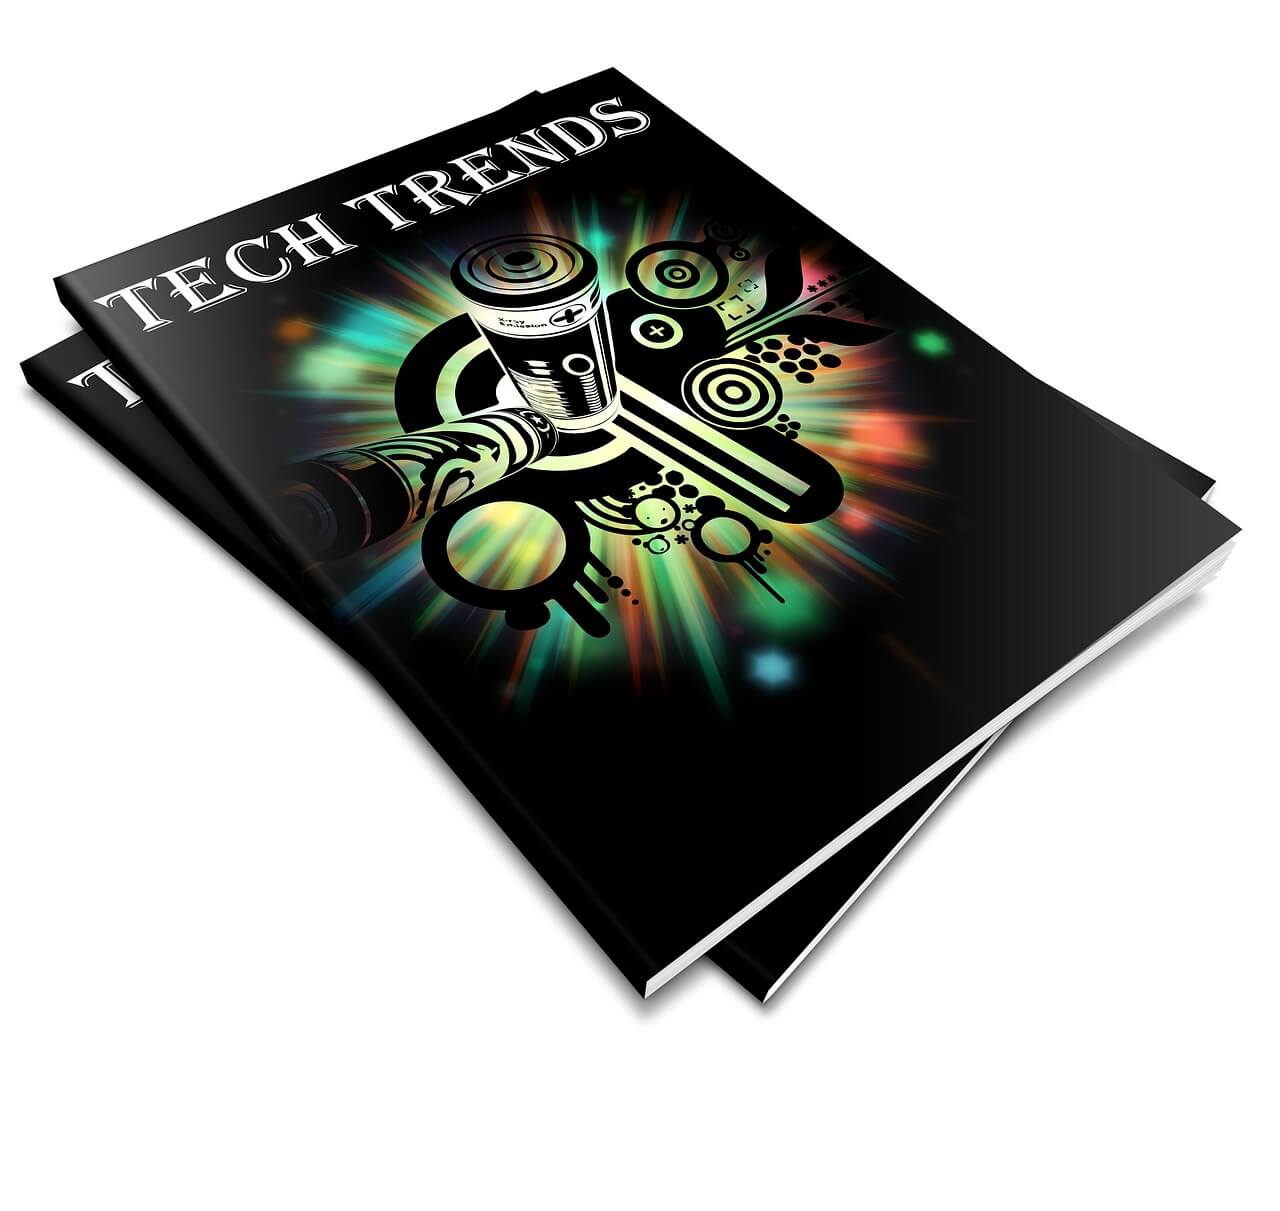 Small Business Tech Trends report magazine illustration